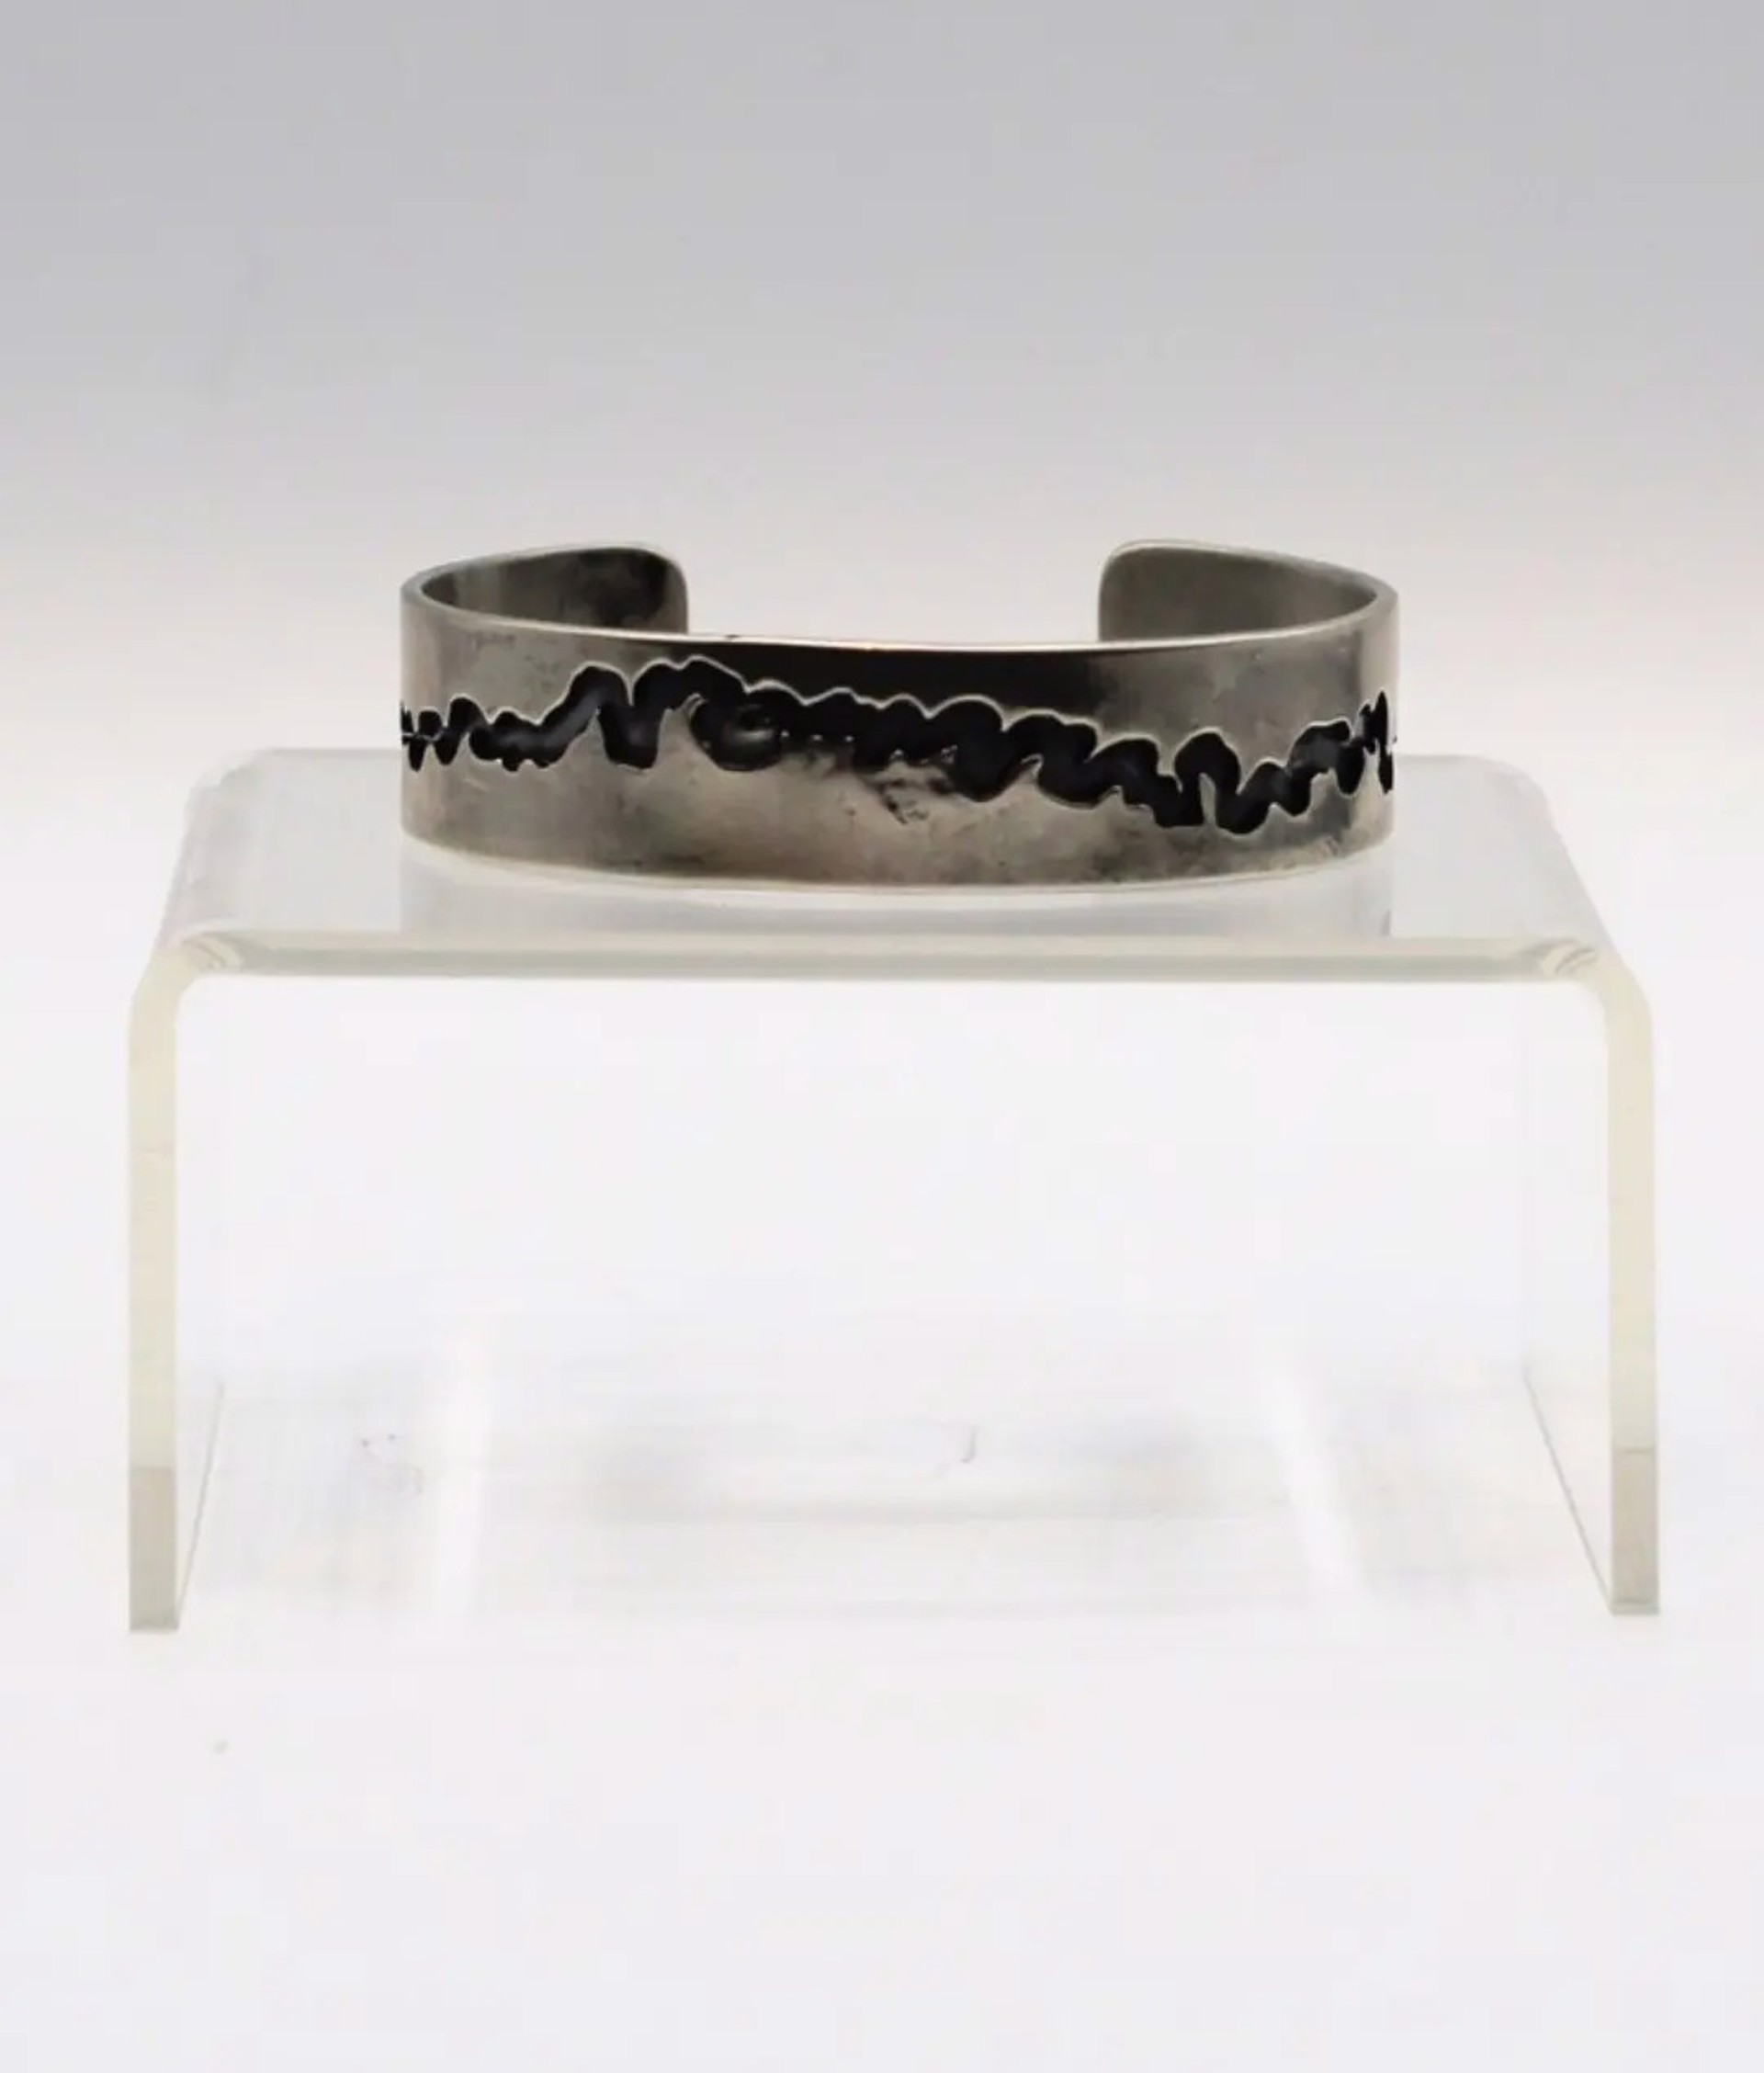 Small Smith River Cuff (Sterling Silver) by Emily Dubrawski